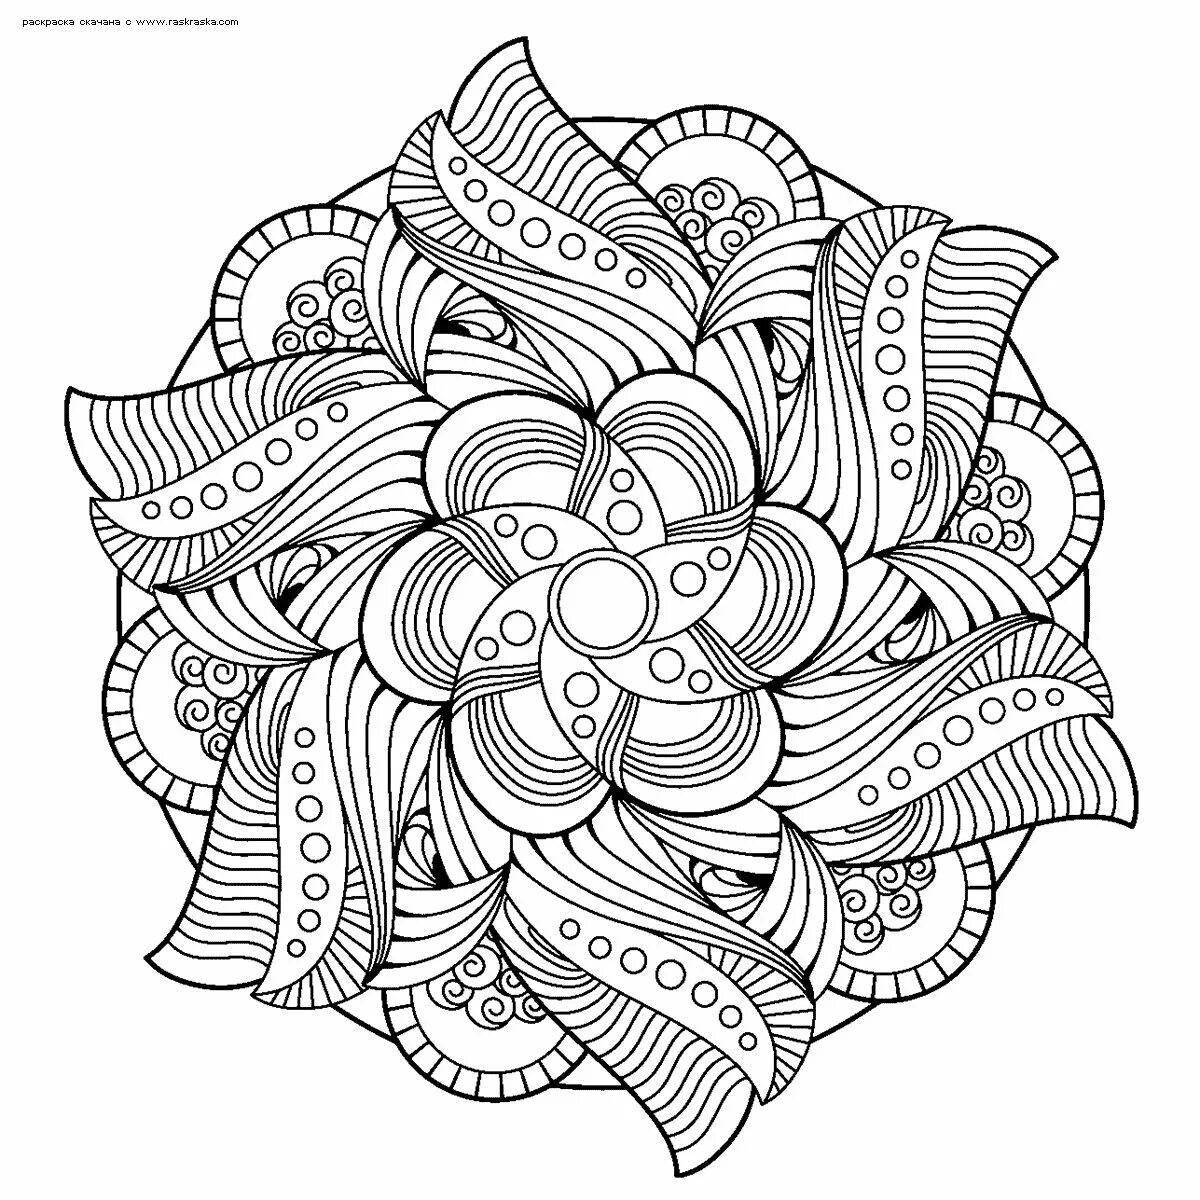 Awesome anti-stress mandala coloring pages for adults en